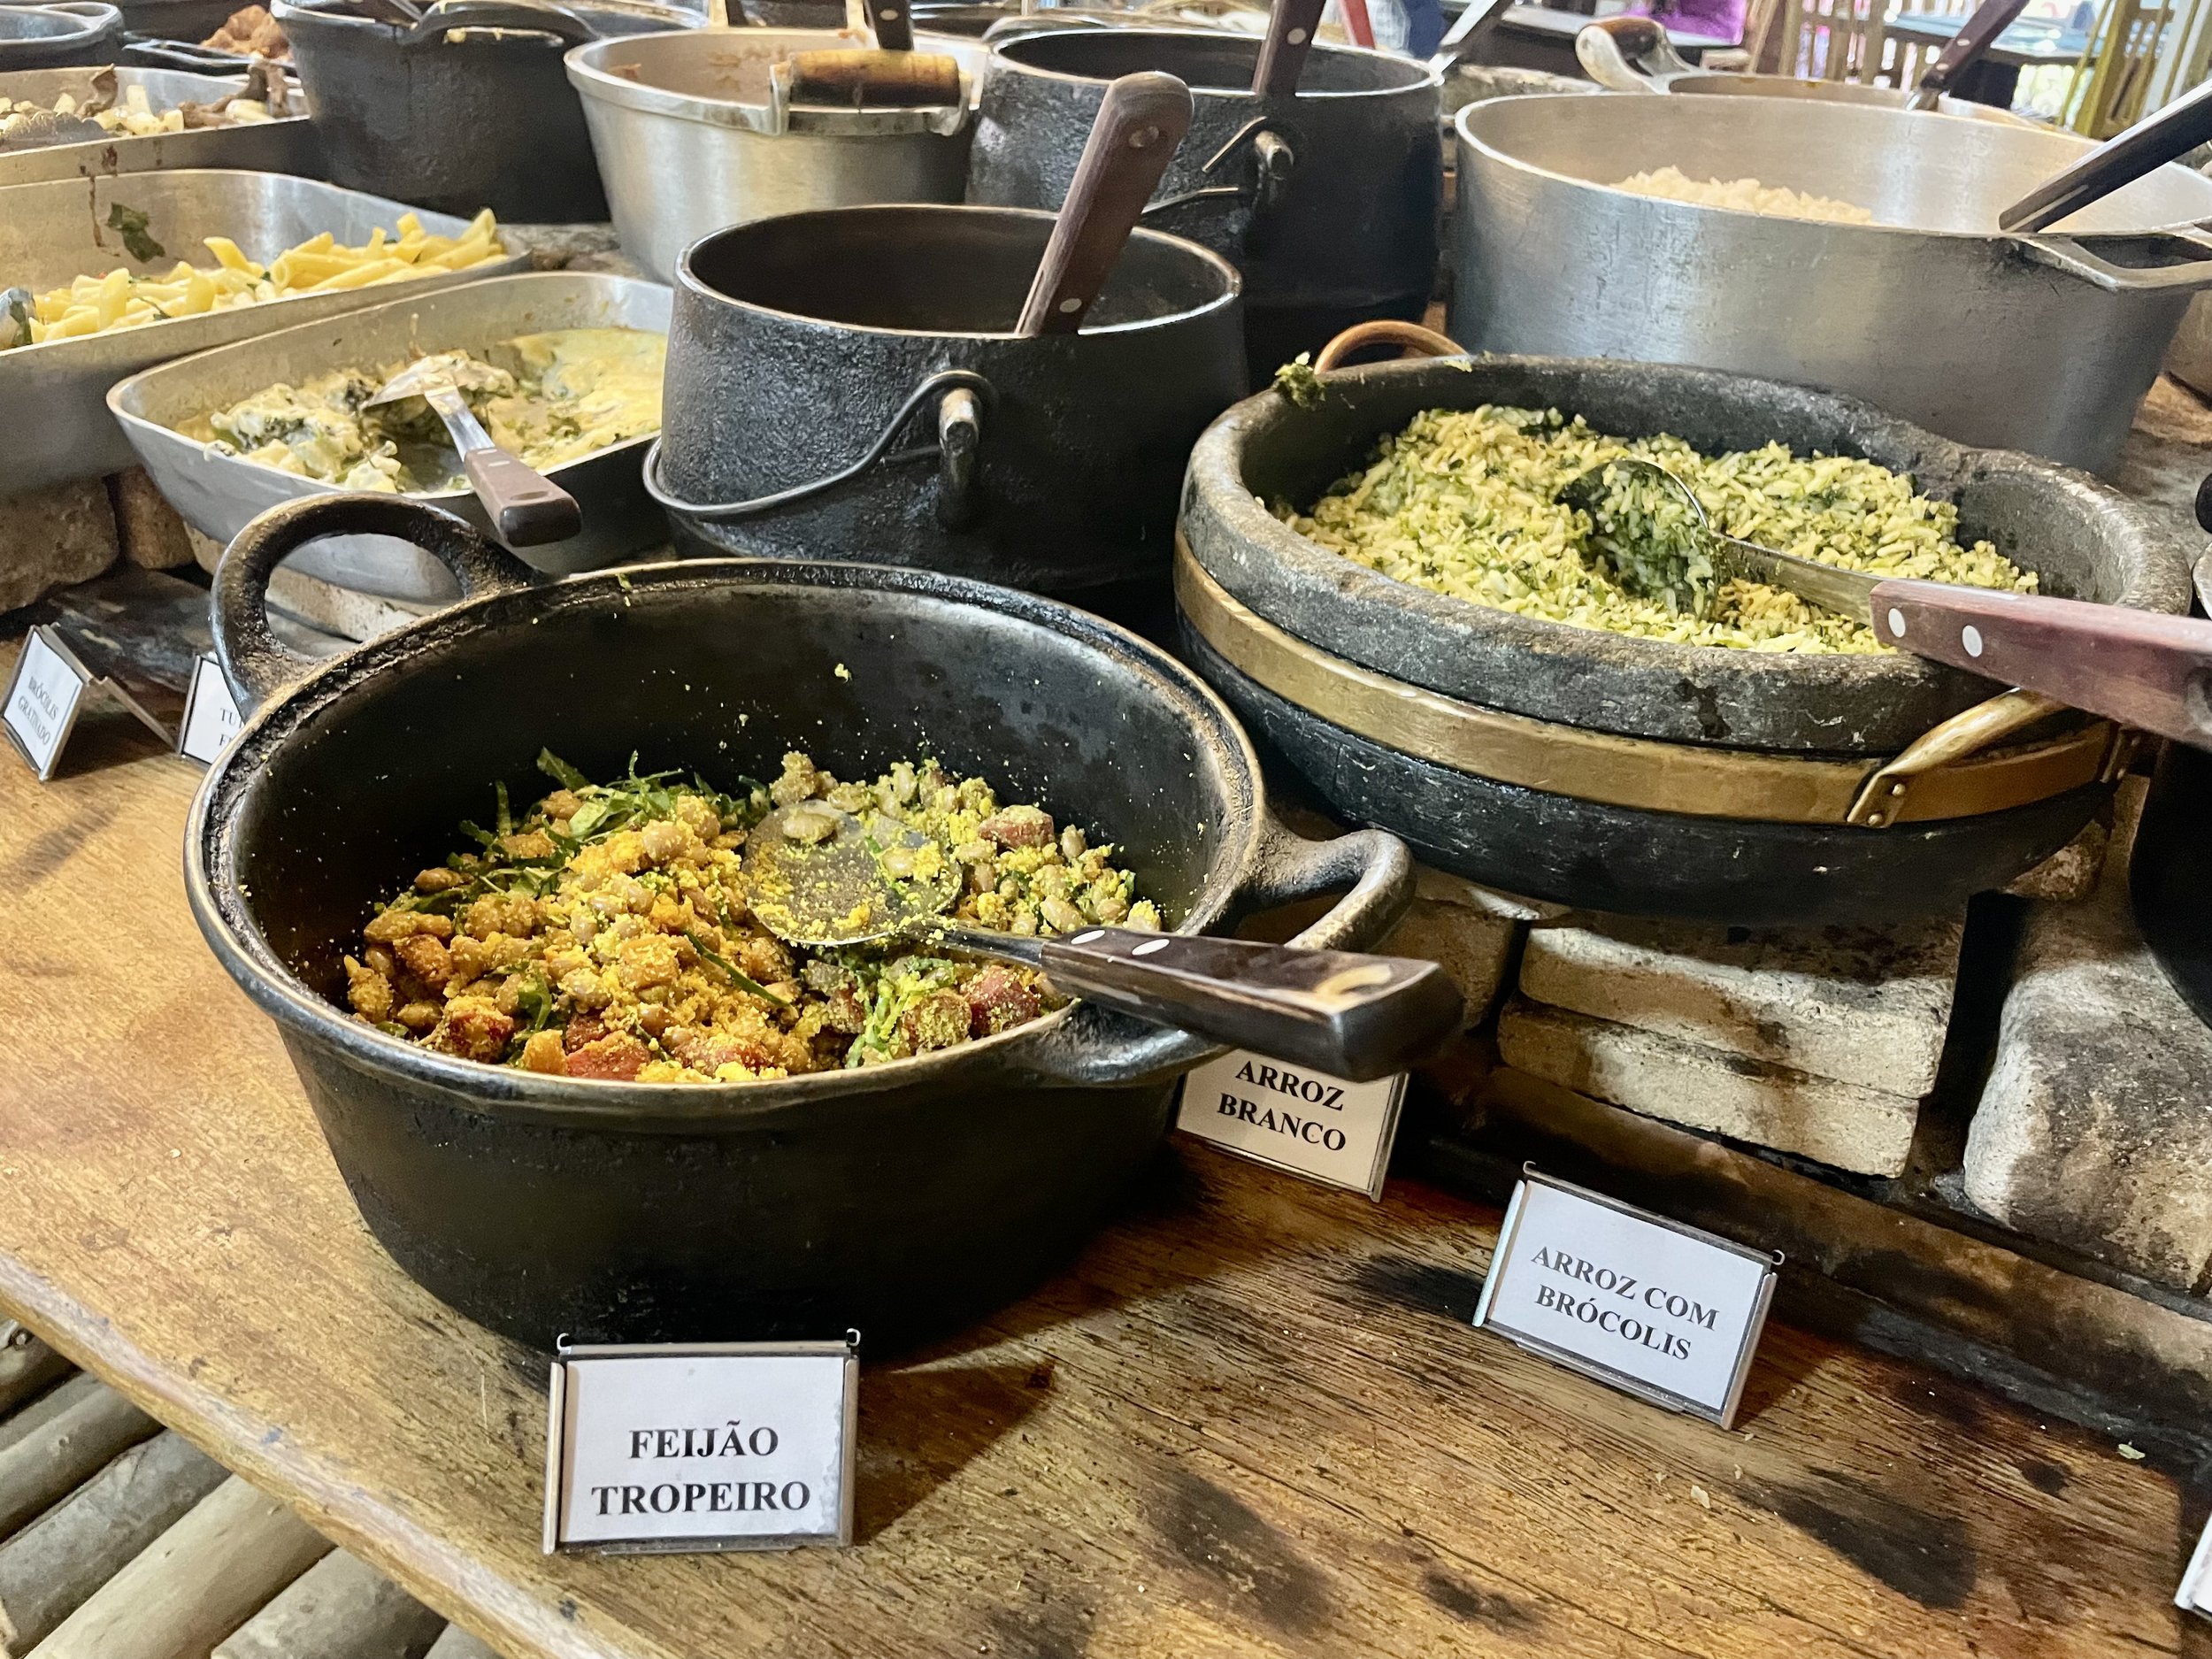 Feijão: So many bean dishes, served with farofa